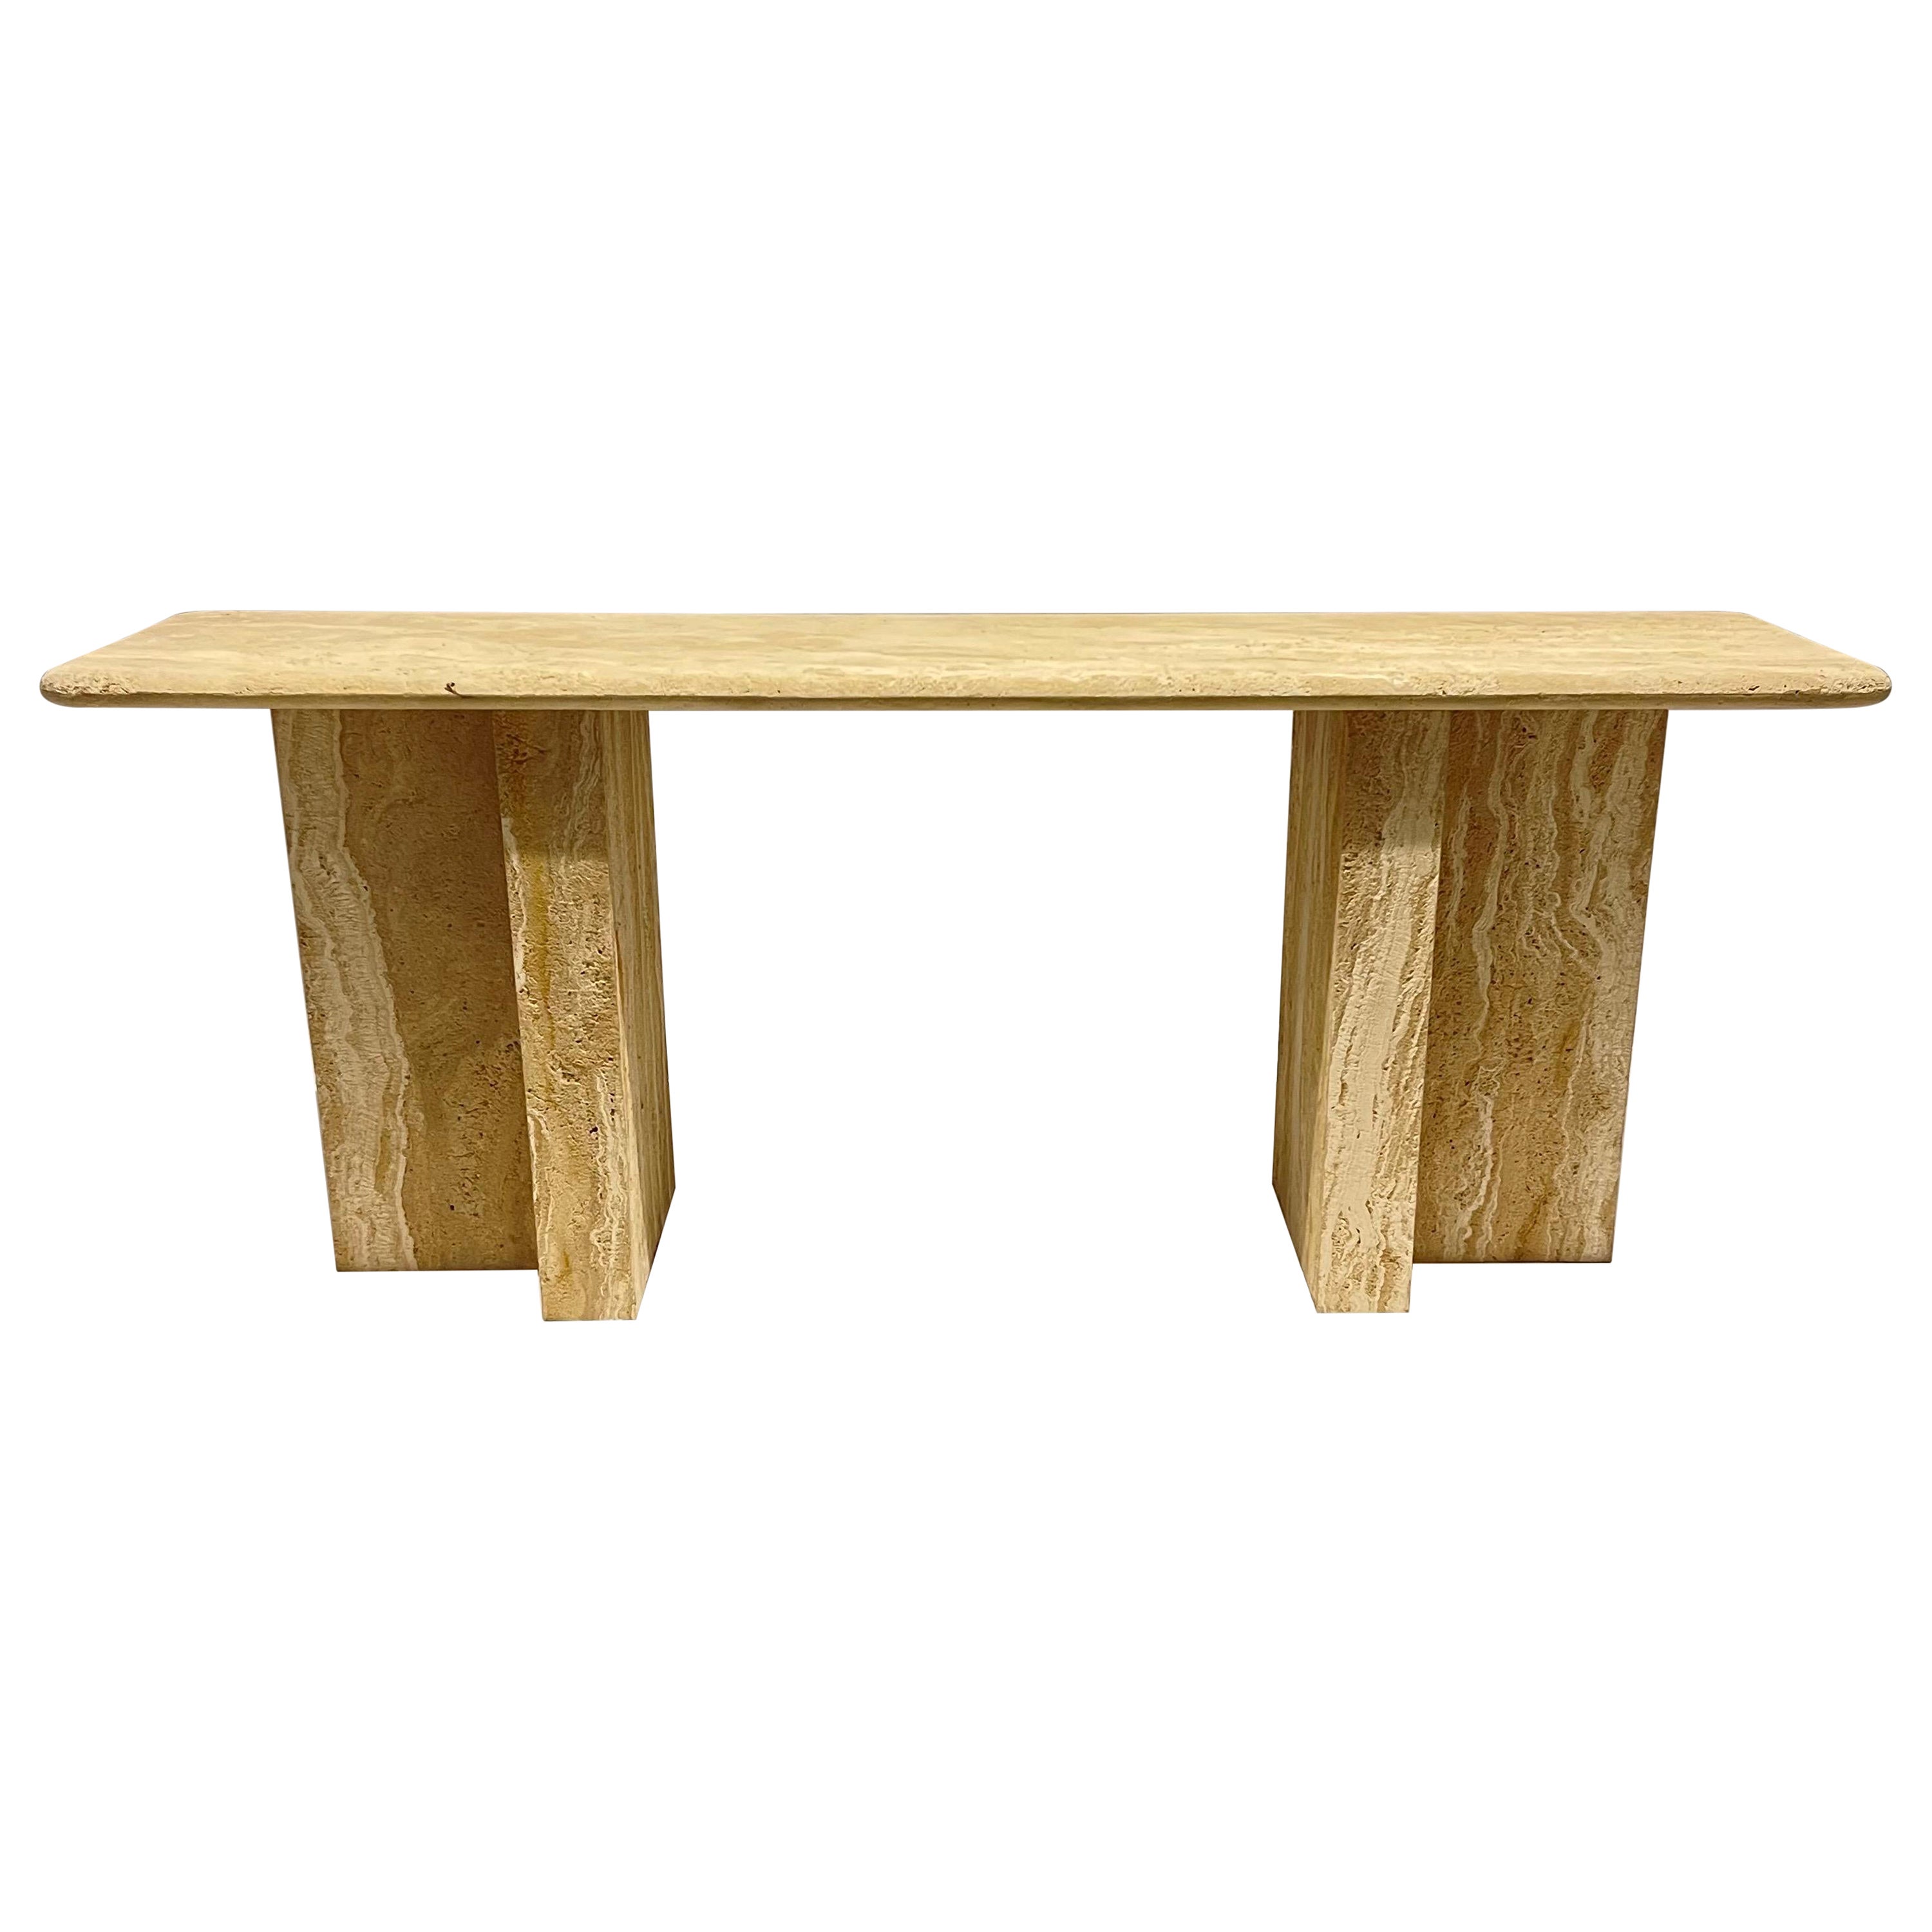 Post Modern Sandblasted Travertine Console or Sofa Table, Italy, 1980's